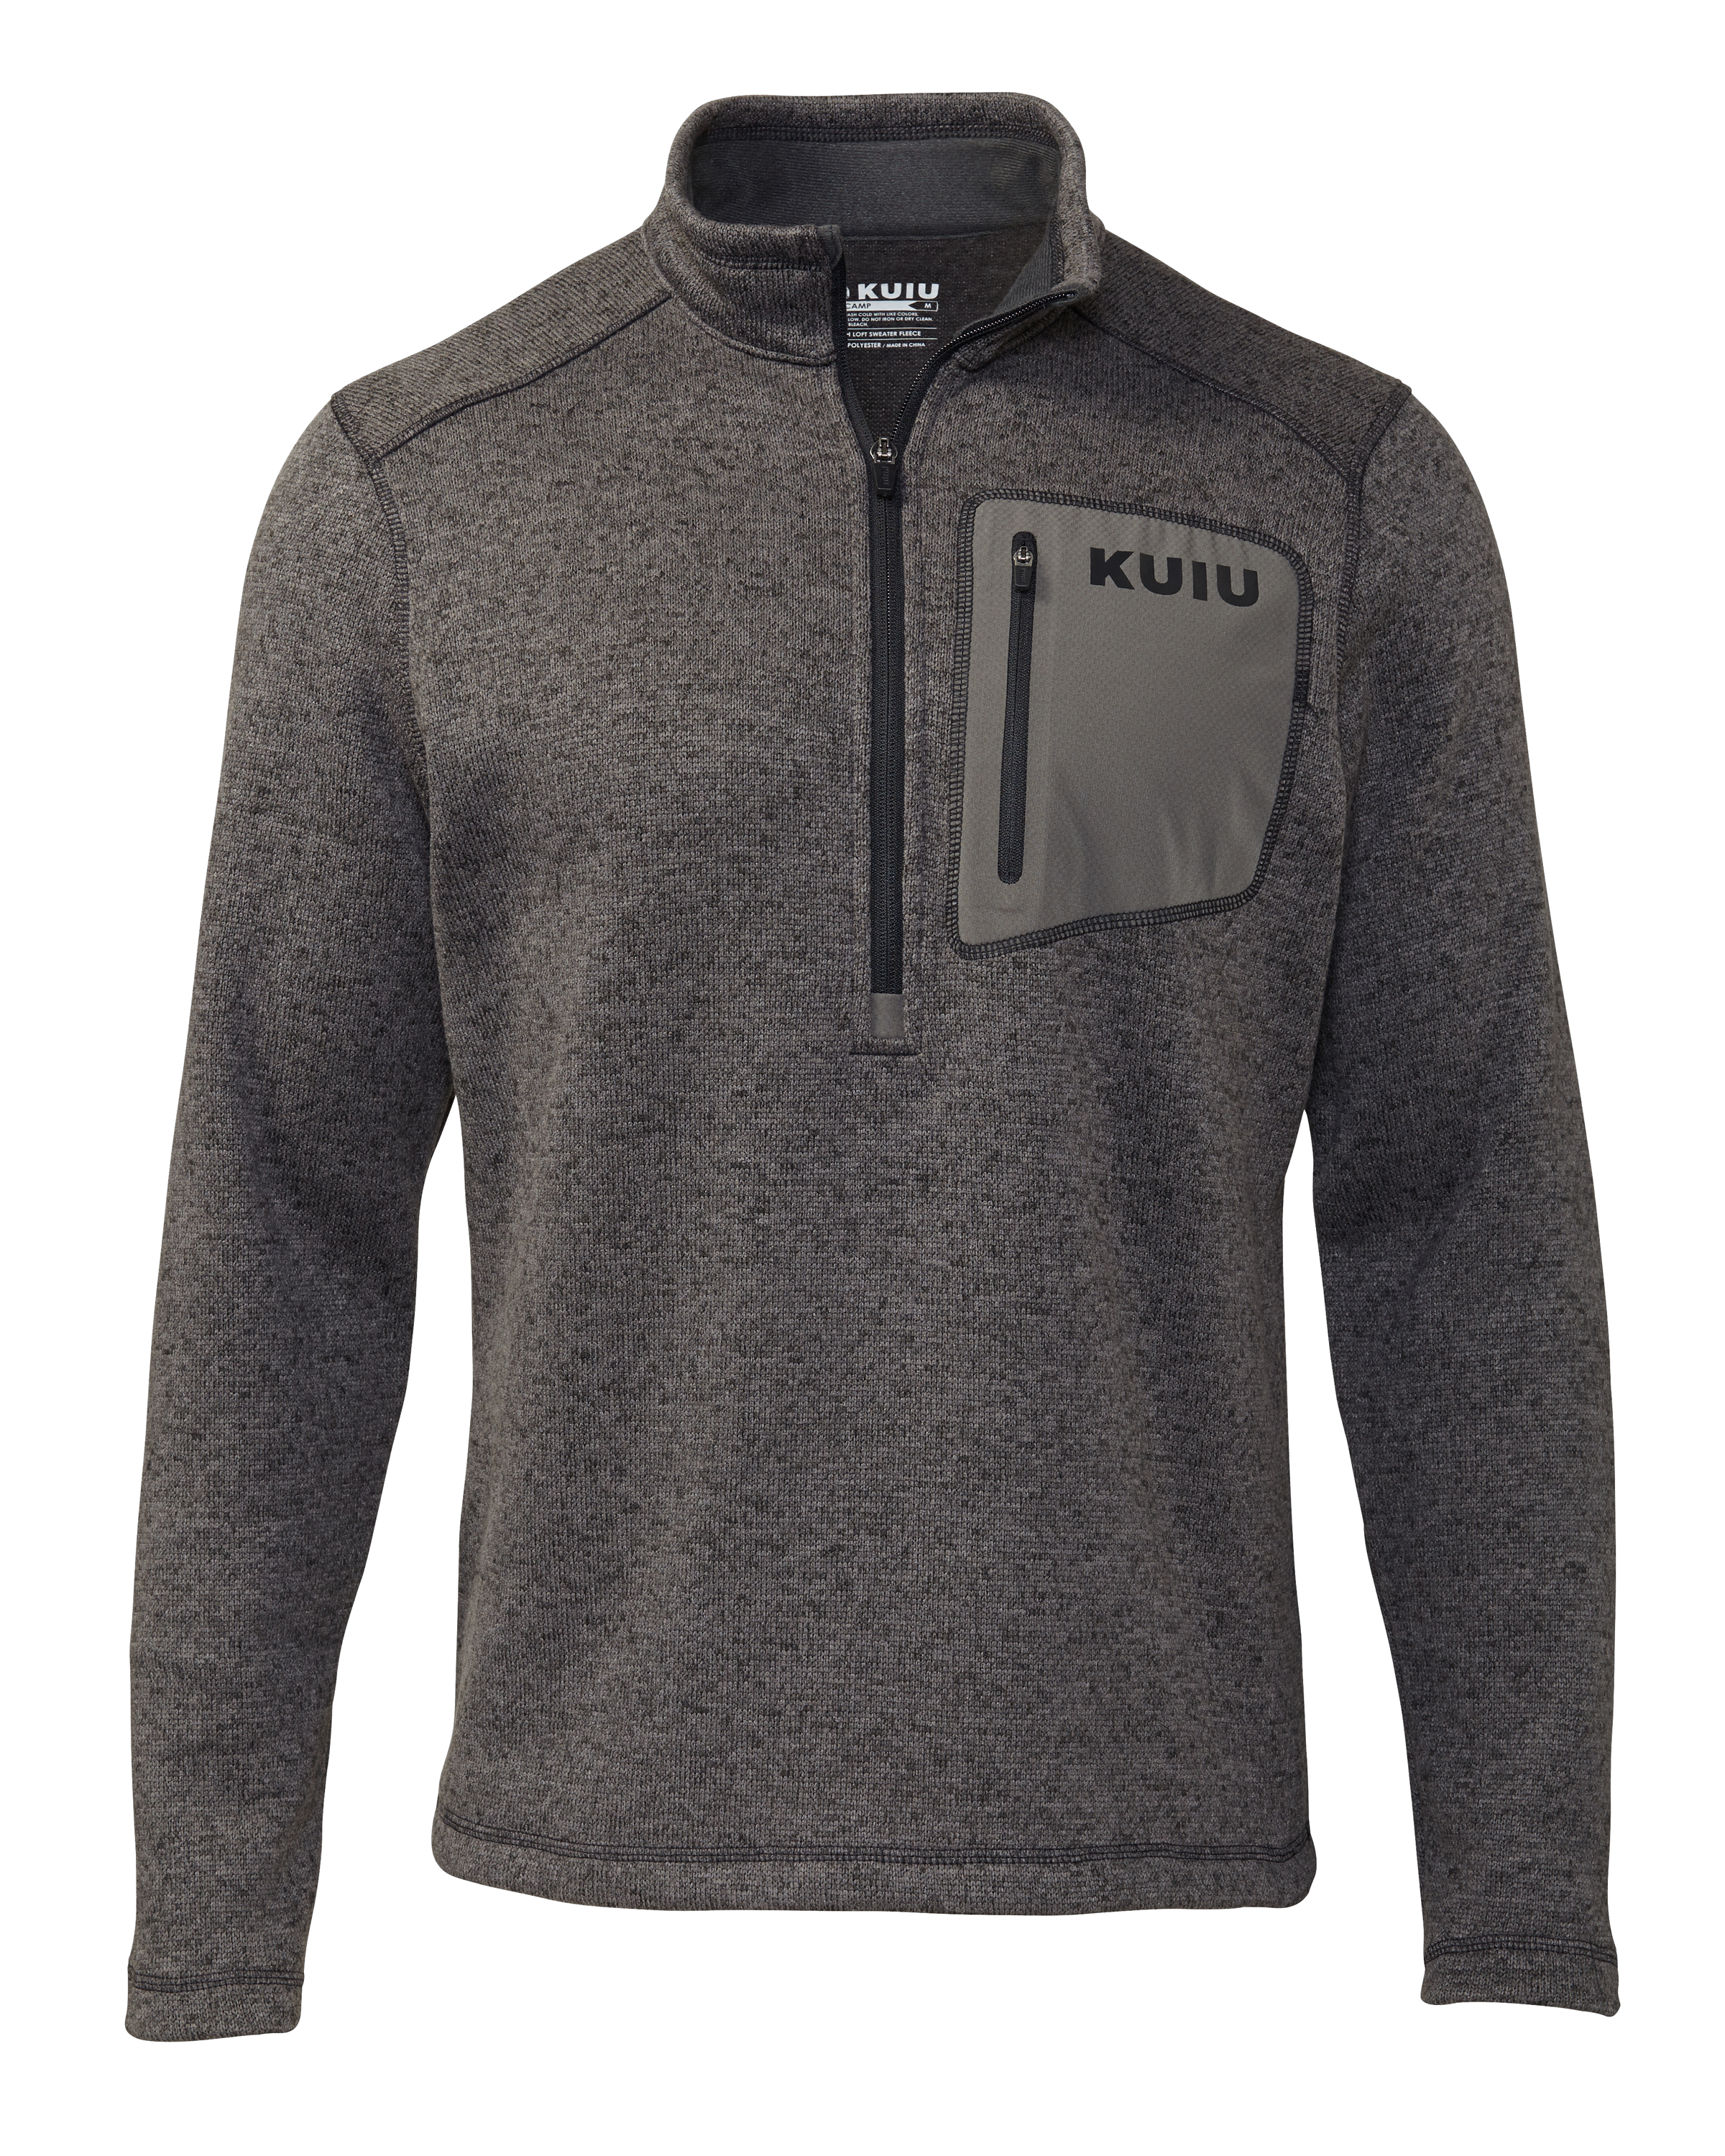 KUIU Outlet Base Camp Pullover Sweater in Charcoal | Size 3XL